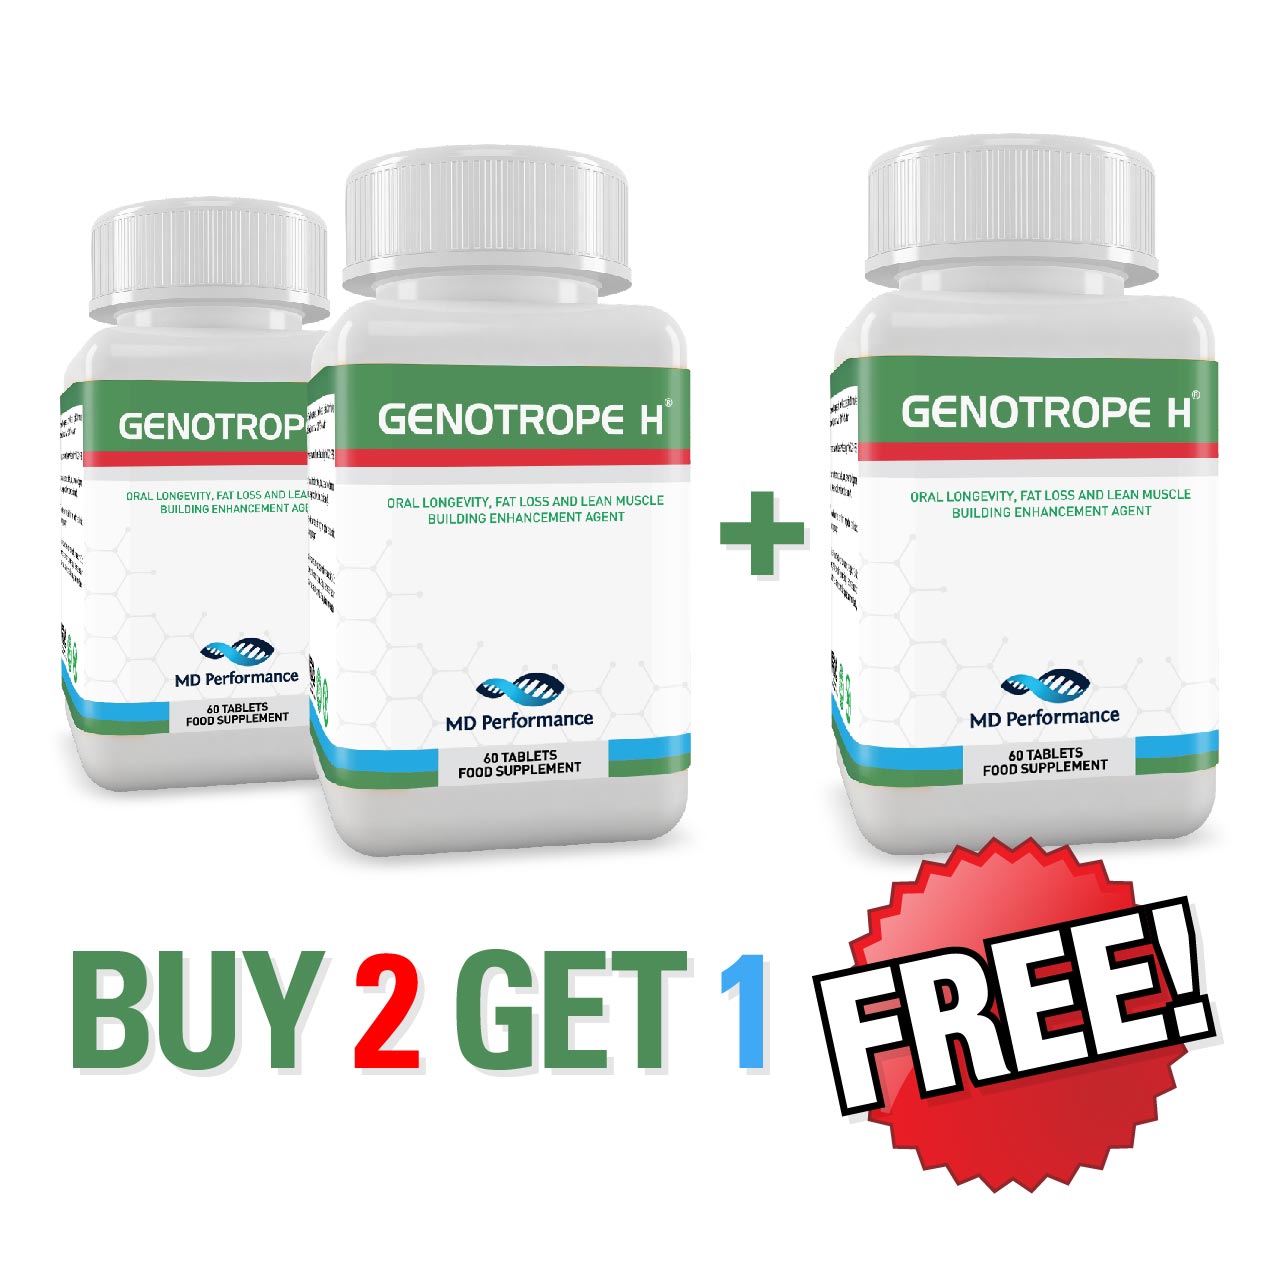 Genotrope H* - Buy Two Get One Free